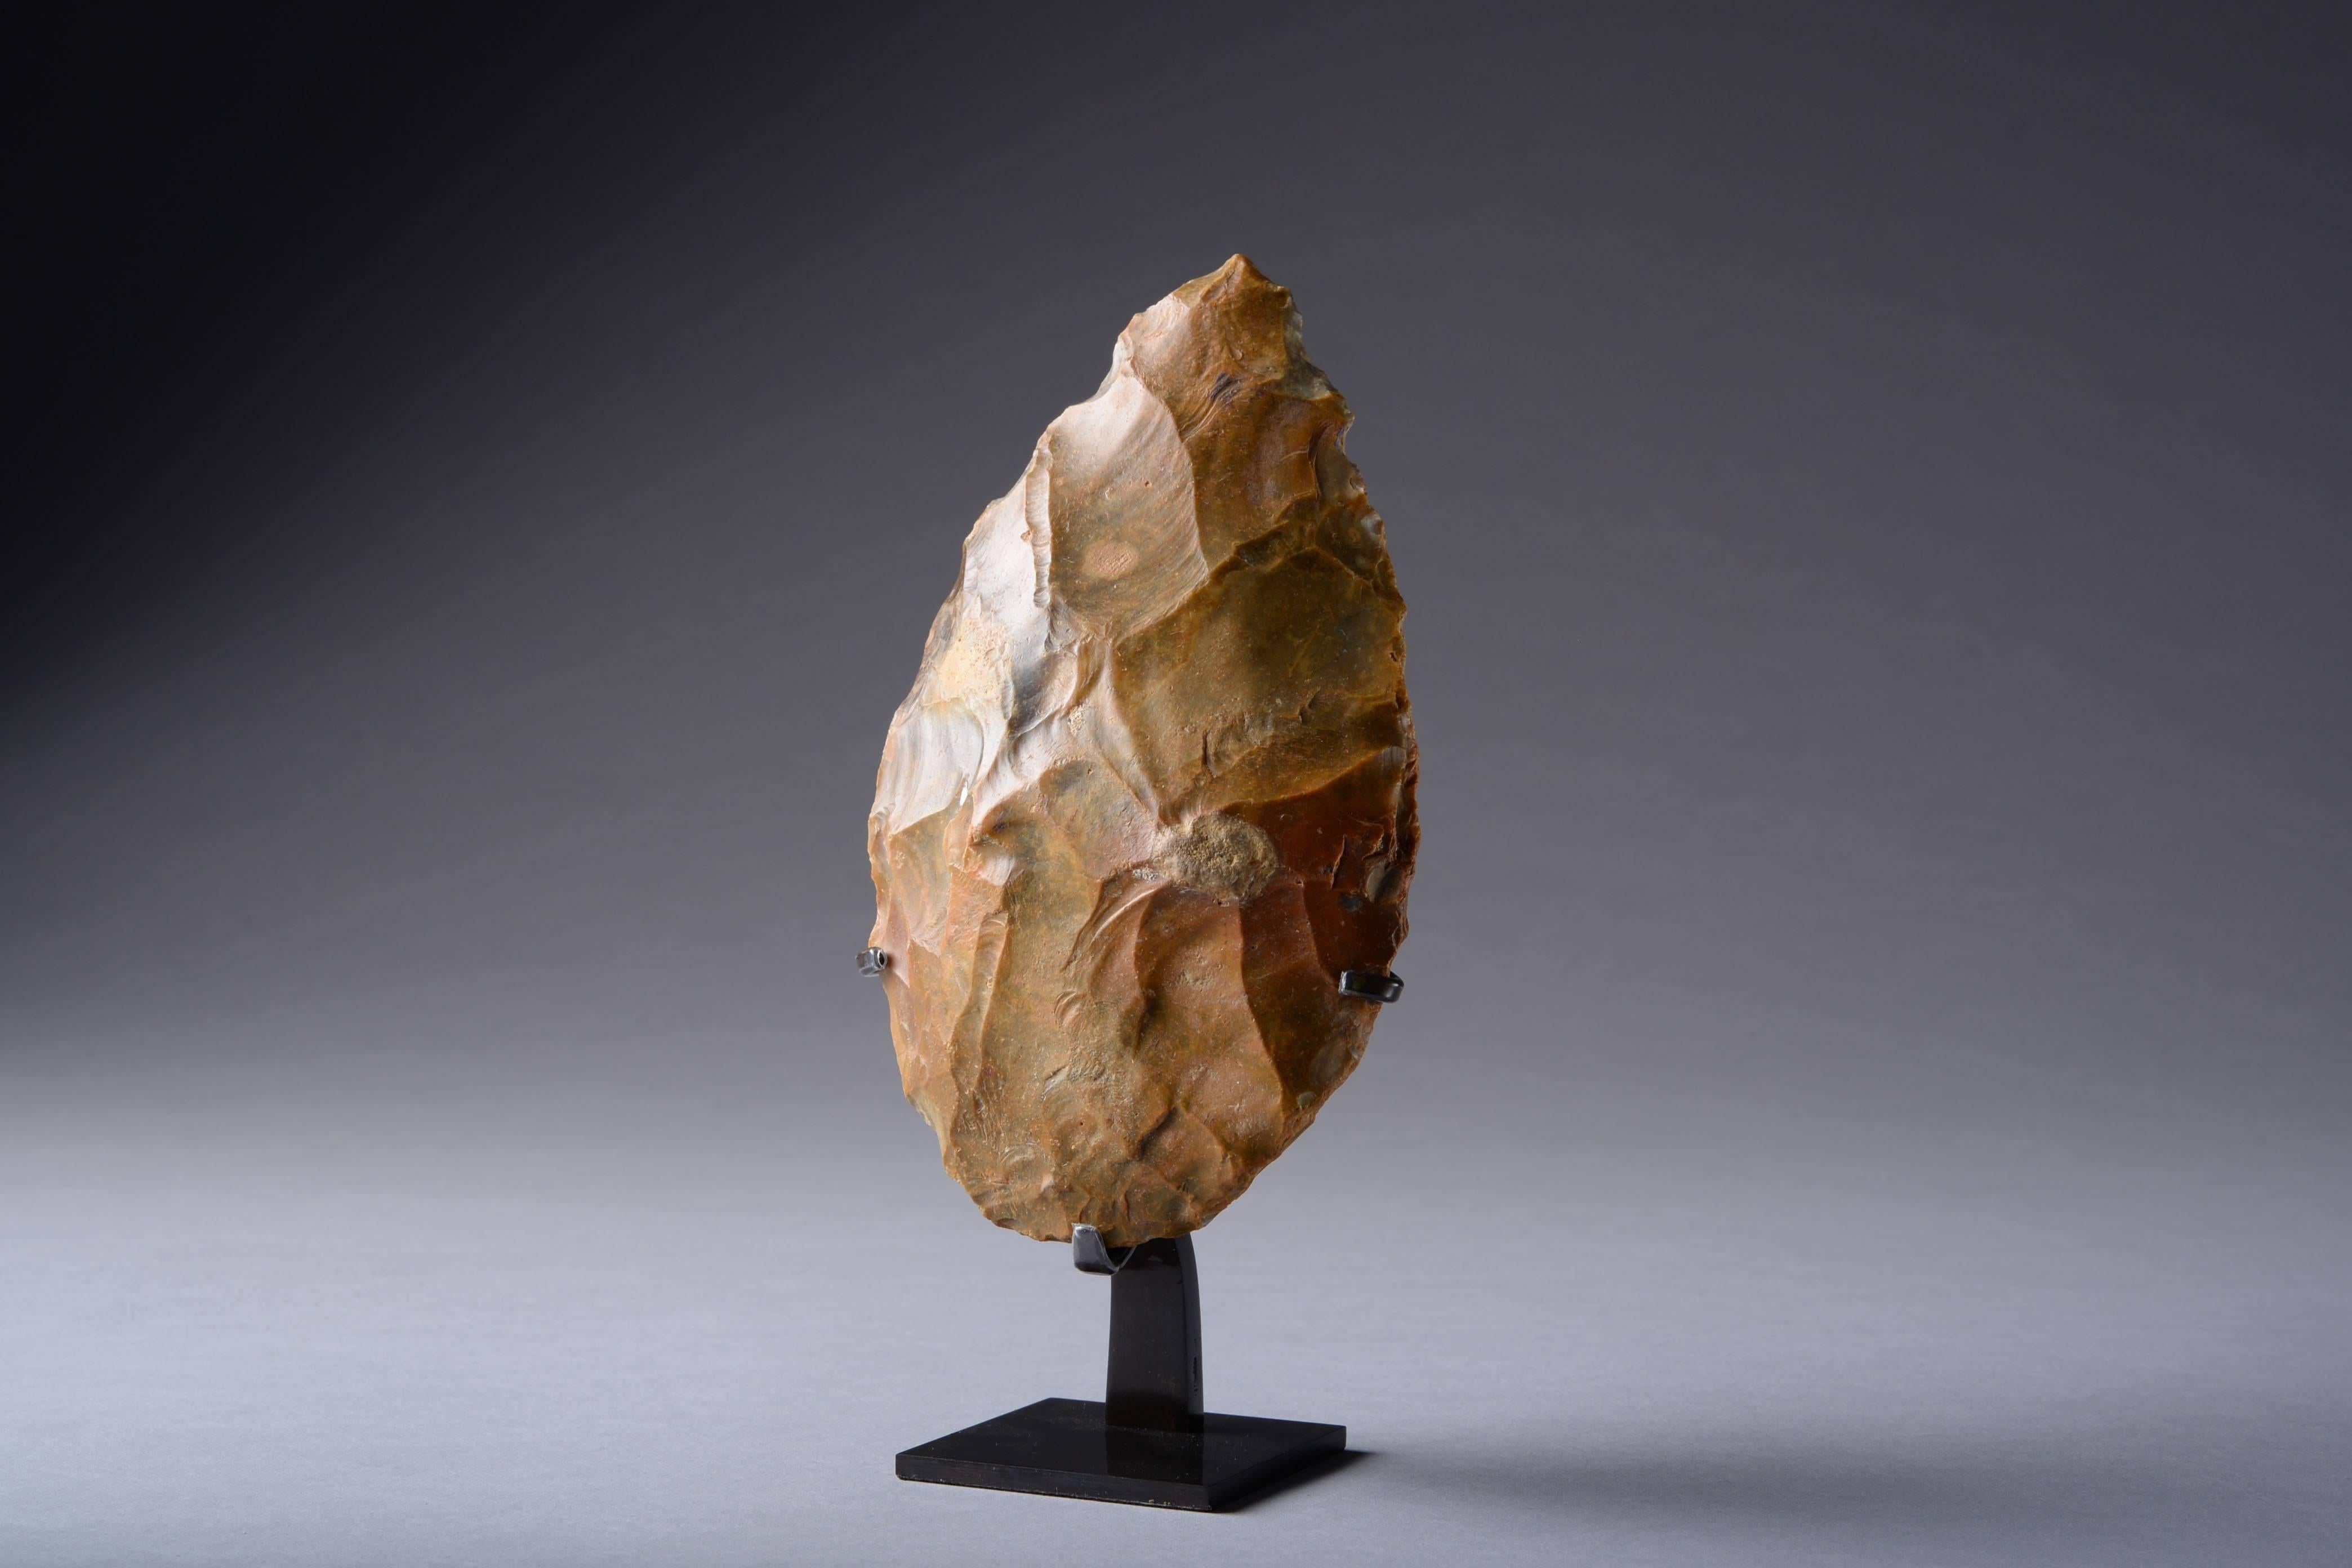 A large Acheulian flint hand axe, likely produced by Homo erectus. Found in northern France, dating to around 800,000 - 100,000 years ago.

Worked from a substantial boulder of flint and knapped into the typical tear-drop form.

An impressive